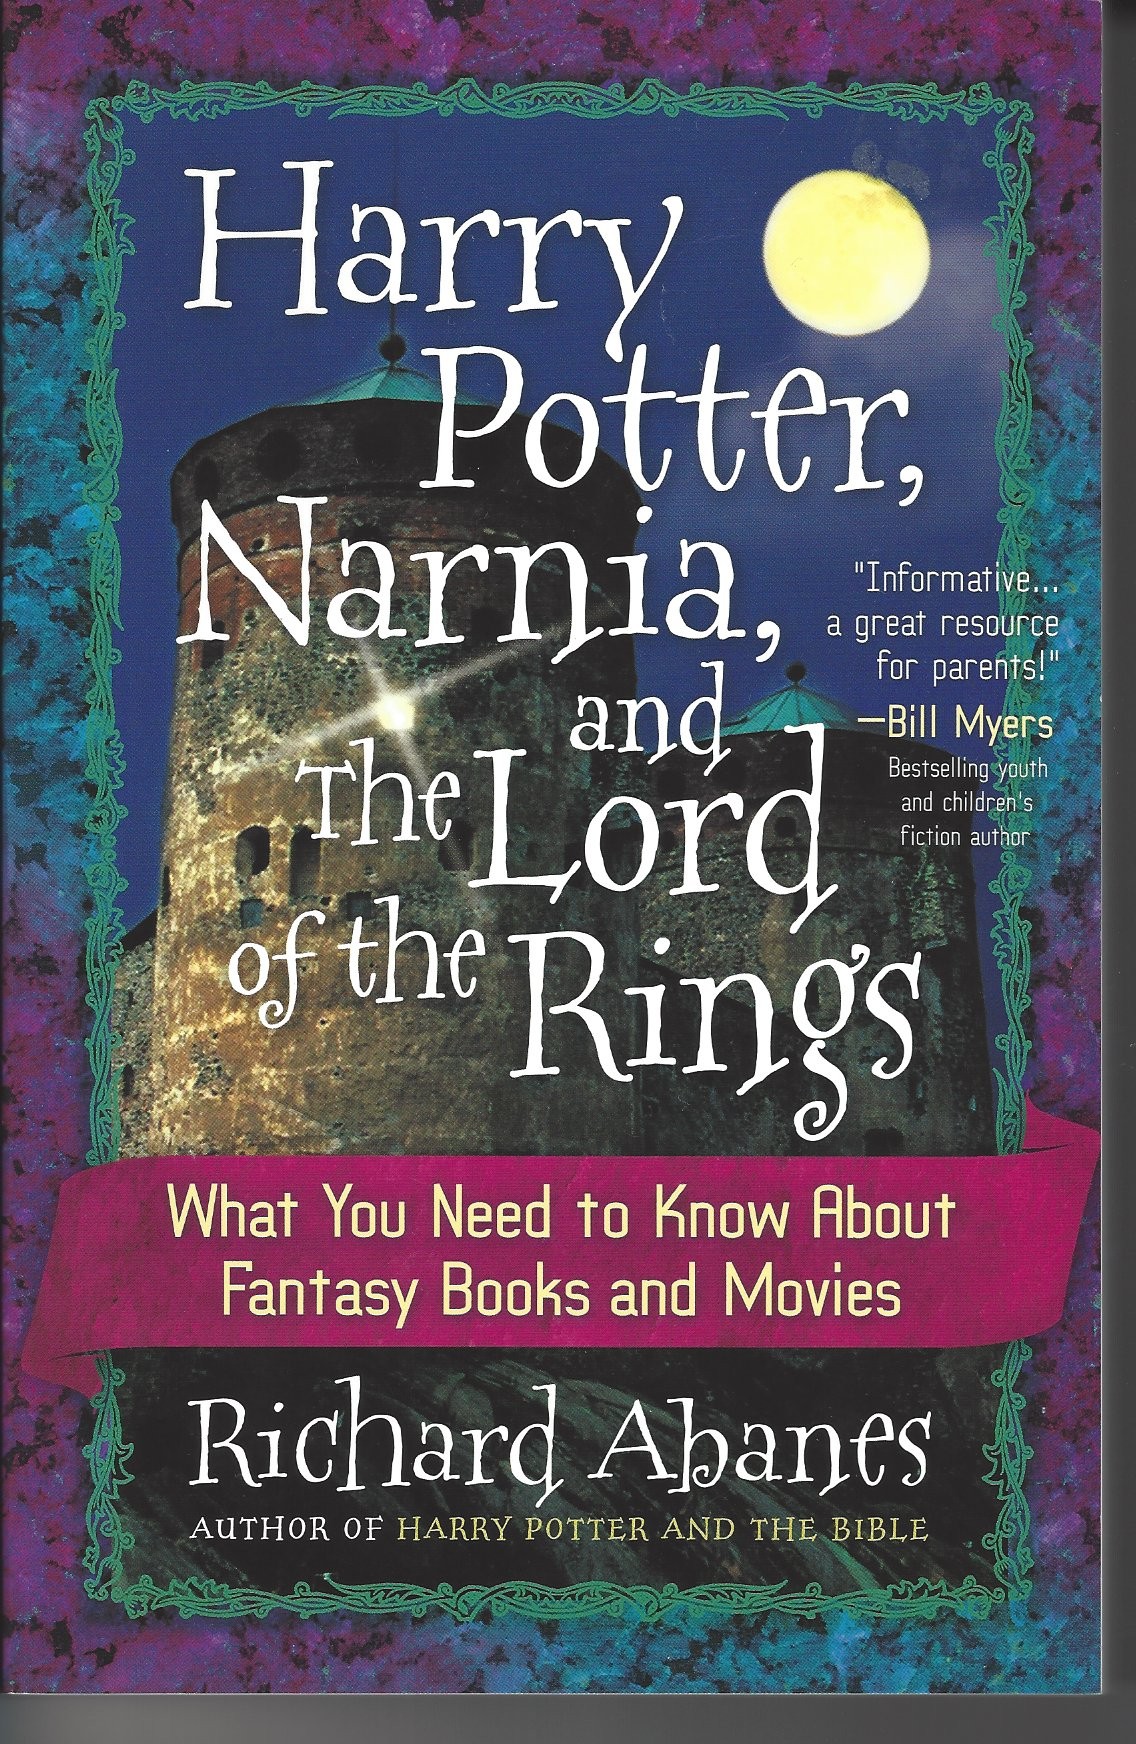 Harry Potter, Narnia, and Lord of the Rings